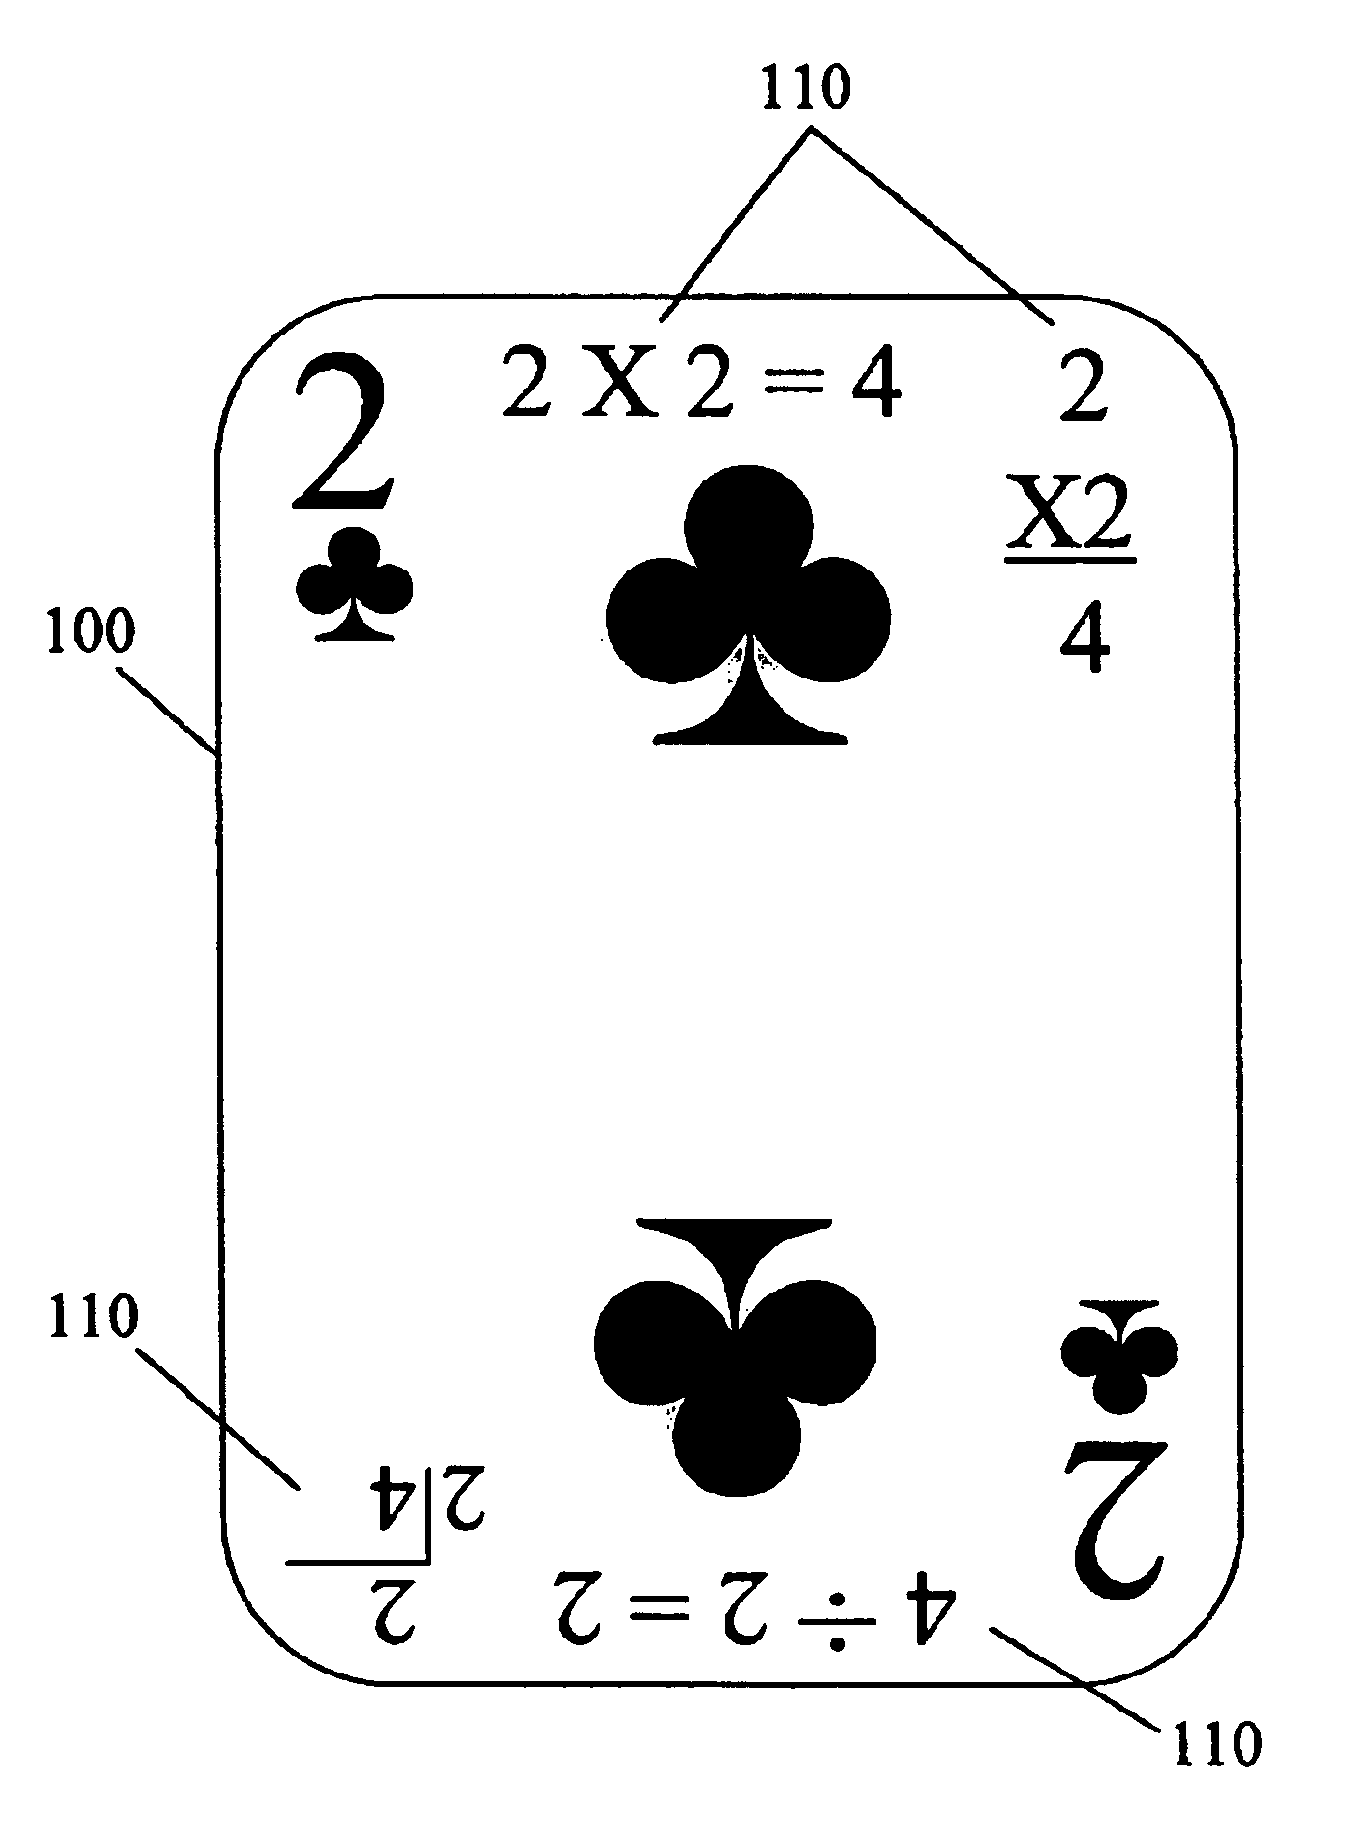 Card game for learning